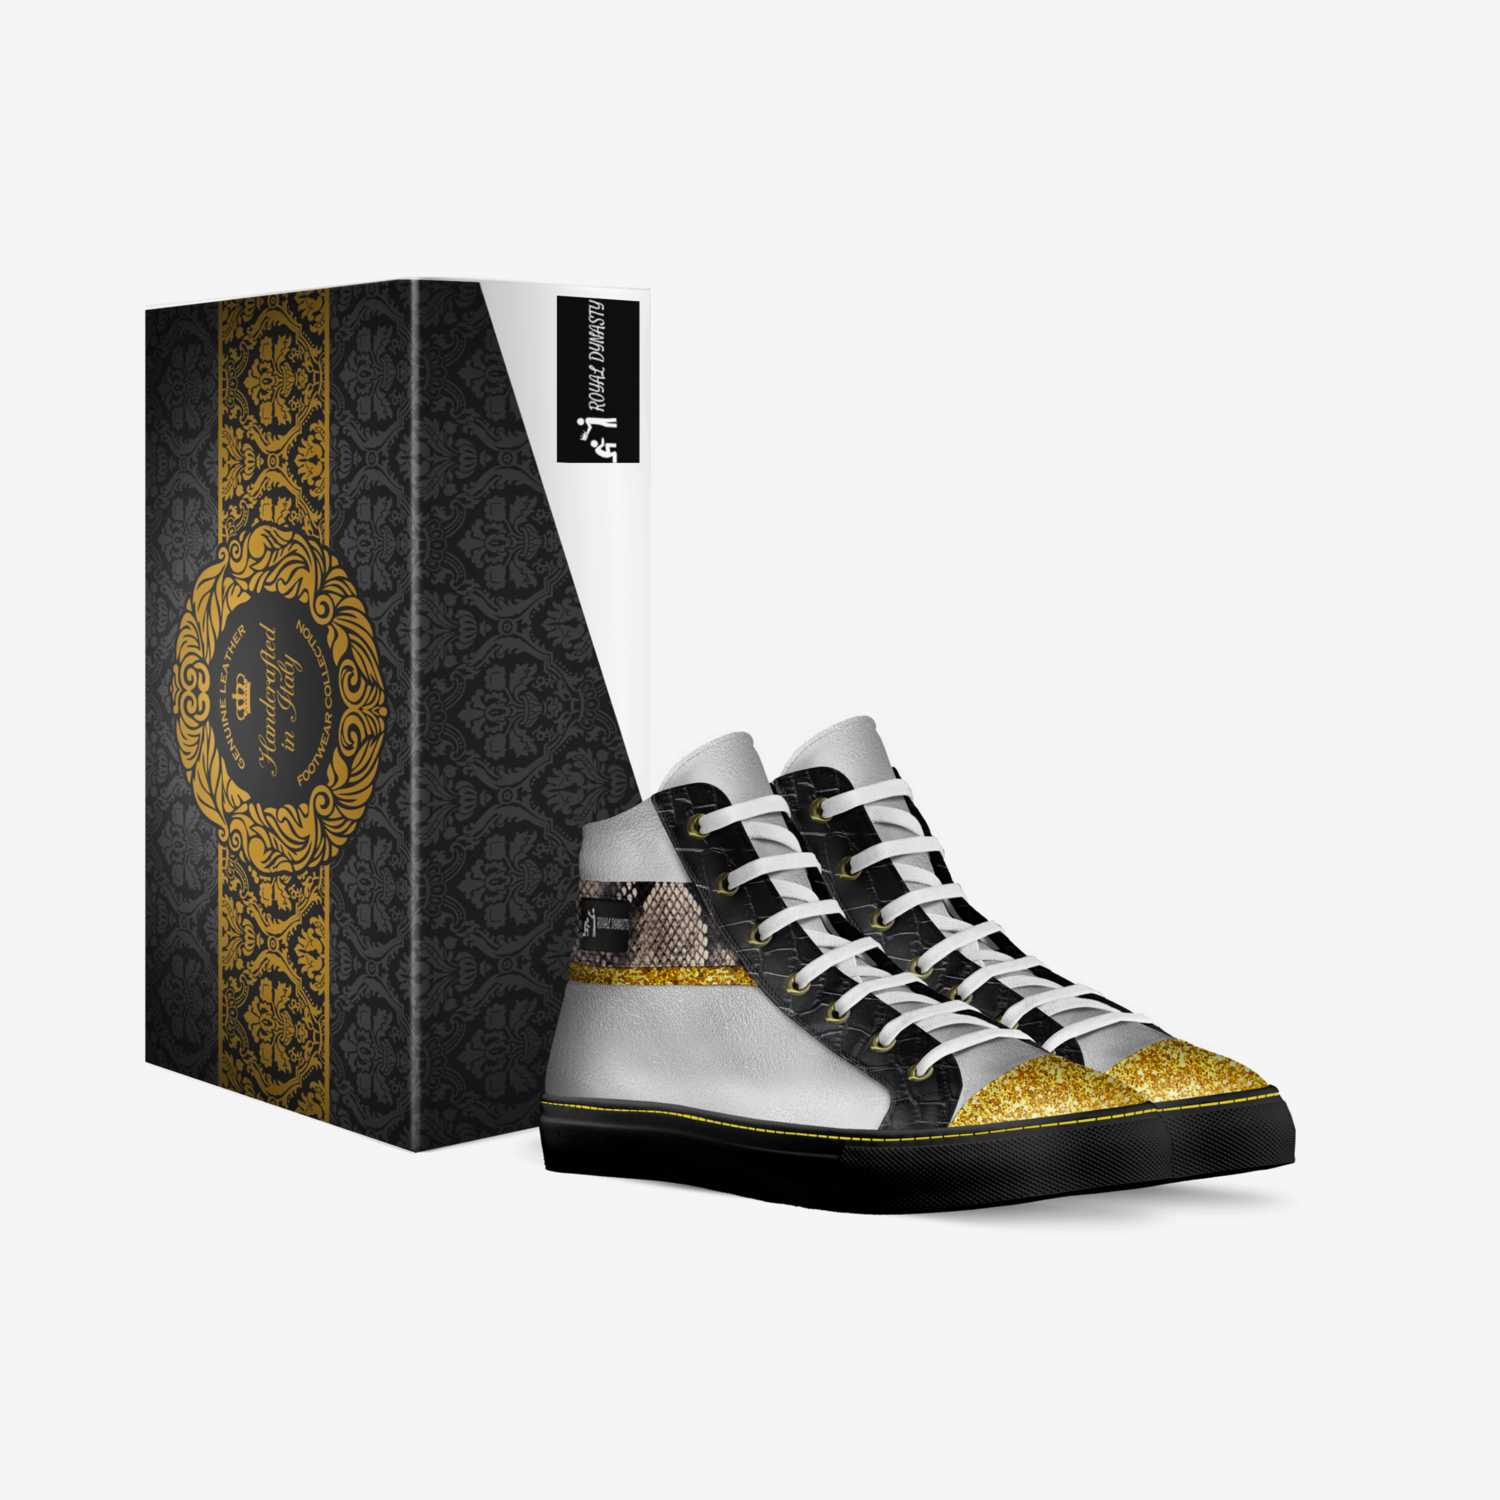 AJ ROYAL DYNASTY  custom made in Italy shoes by Jalal Jaqur | Box view